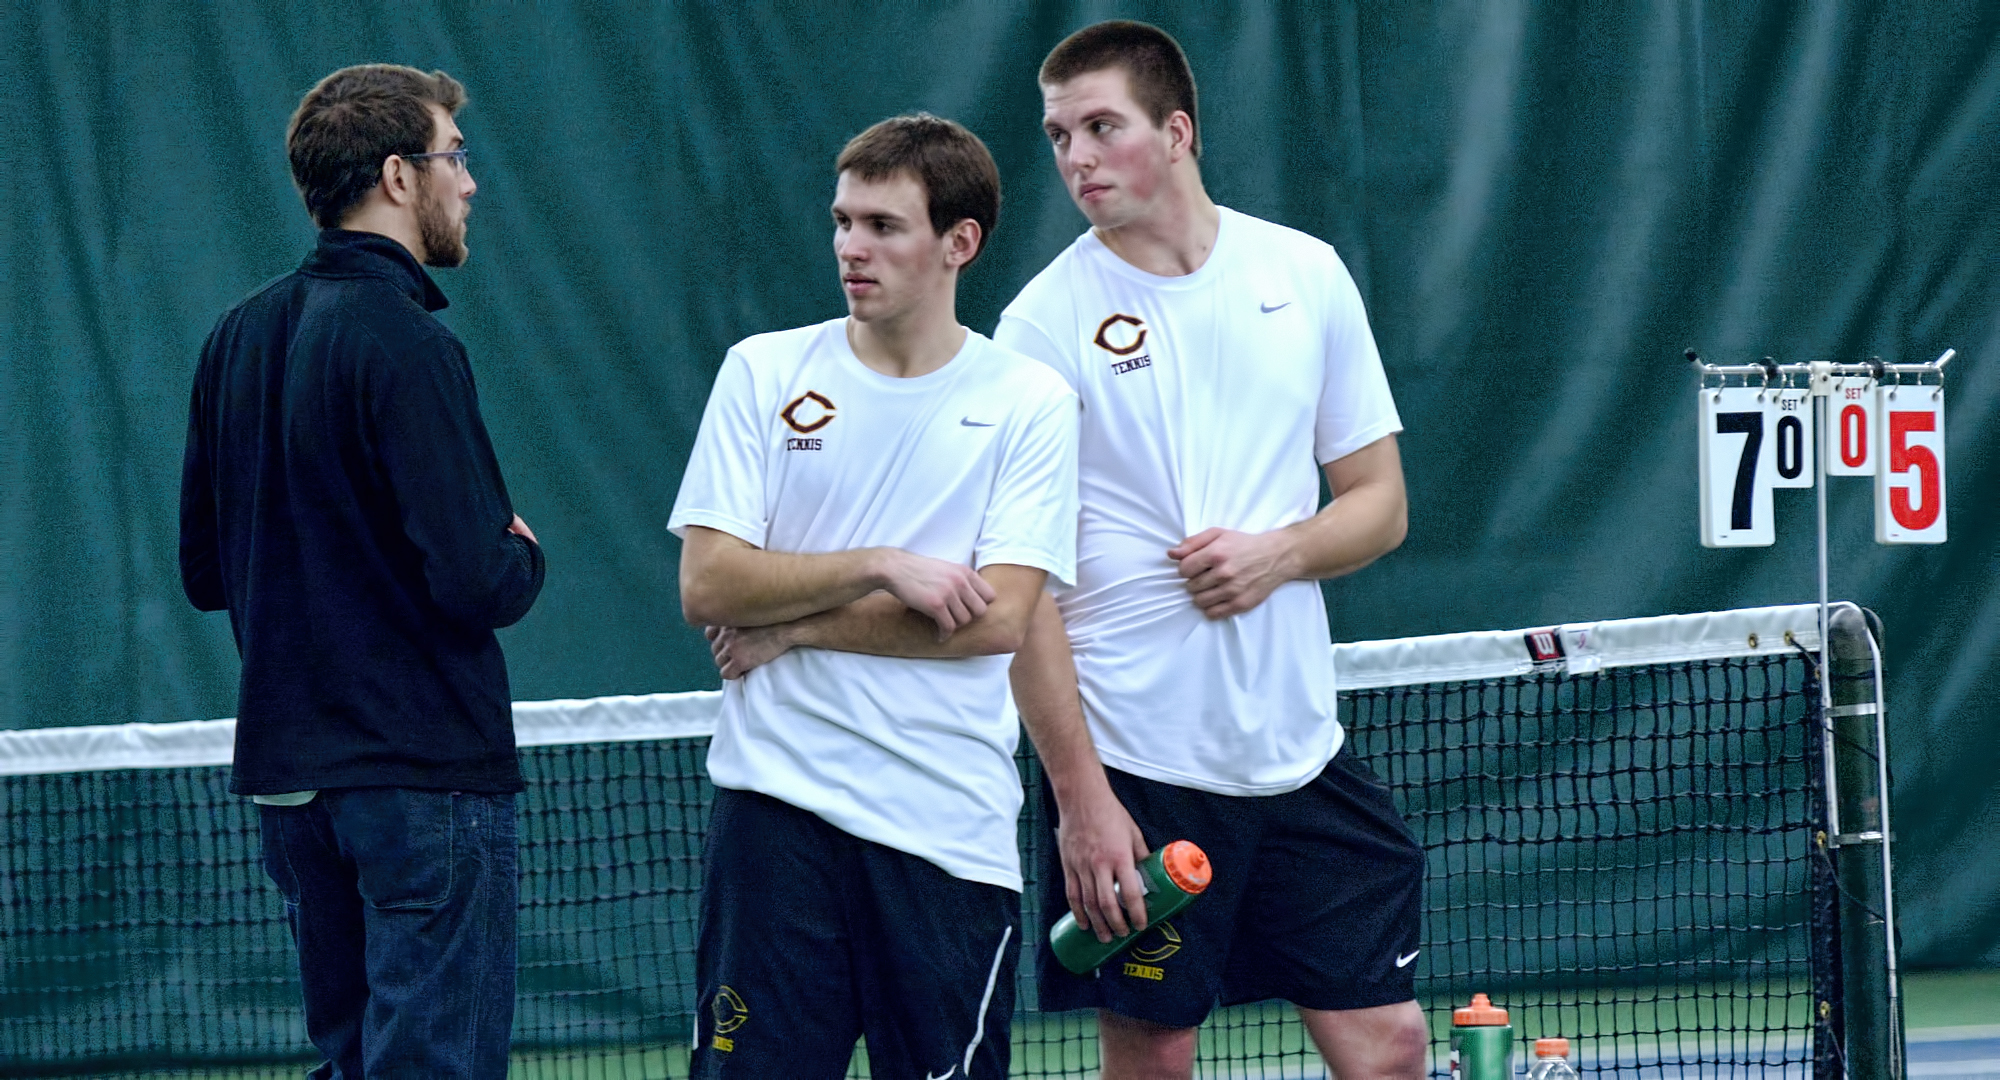 The Cobber No.1 doubles team of David Youngs (L) and Isaac Toivonen talk with head coach Joseph Murrey. The tandem won their bout at No.1 doubles and both players claimed singles wins in CC's 5-4 win at St. Mary's.